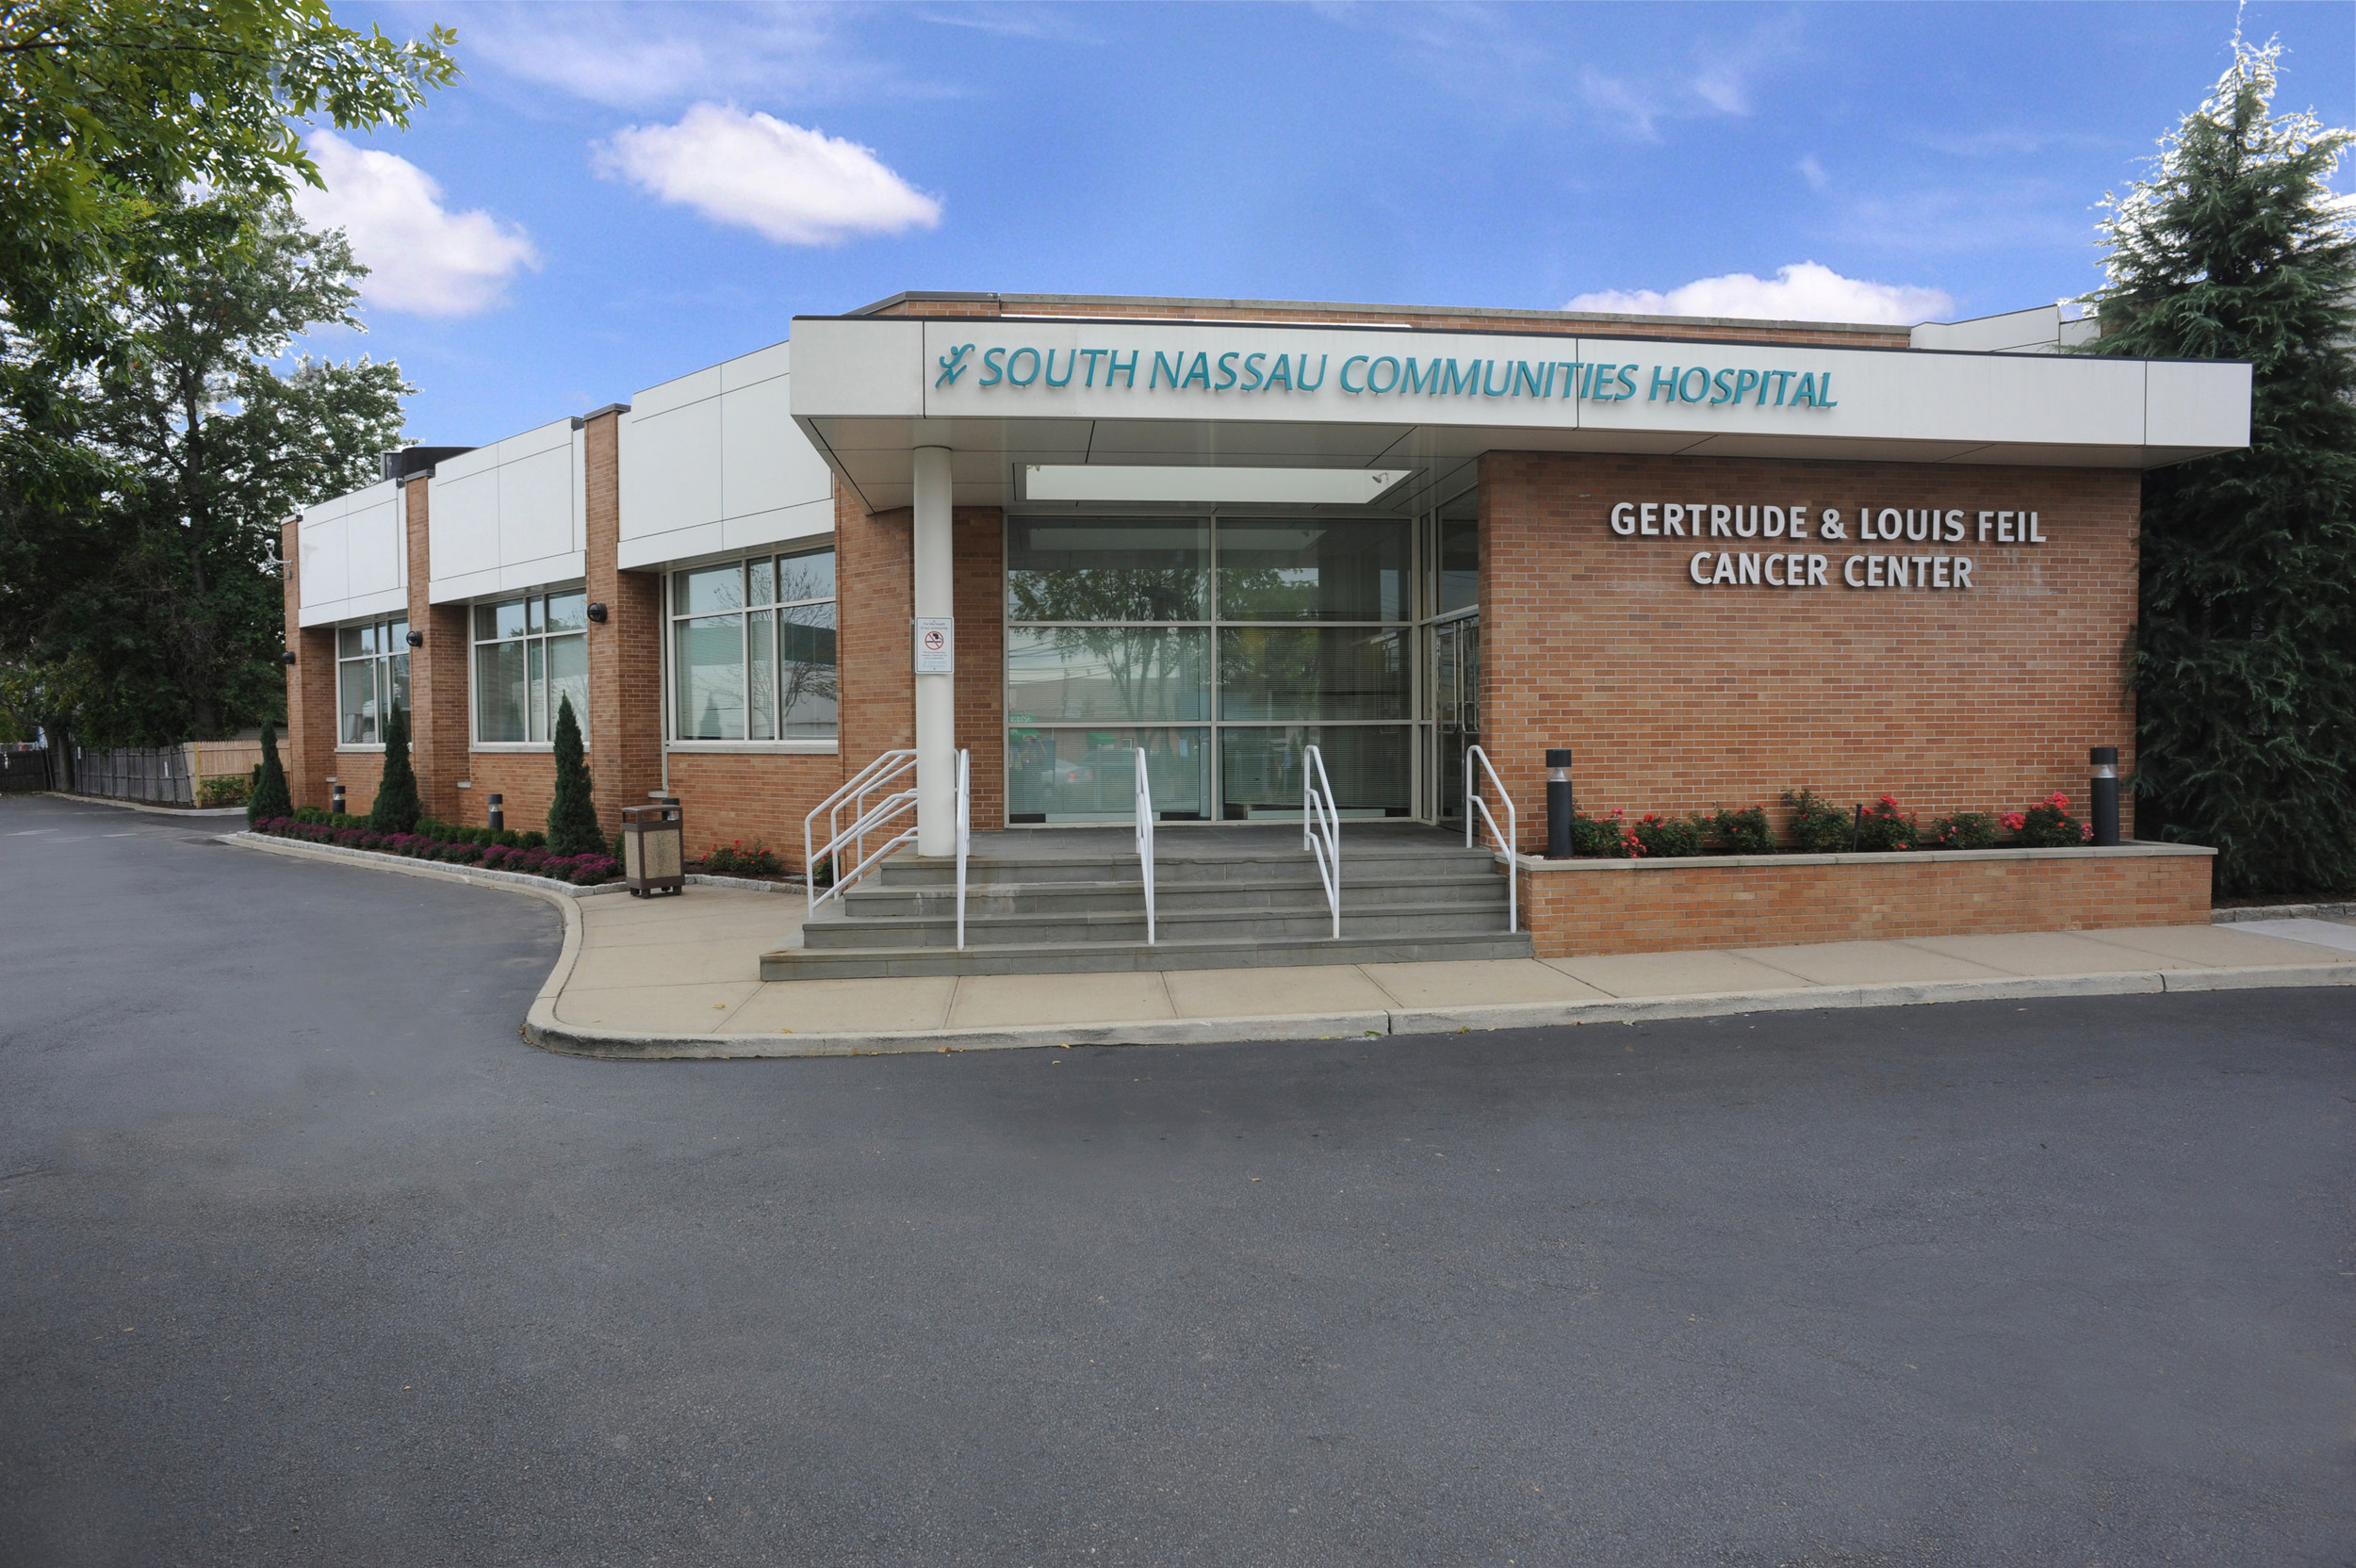 The Feil family donated $3 million to help expand the Gertrude & Louis Feil Cancer Center in Valley Stream.